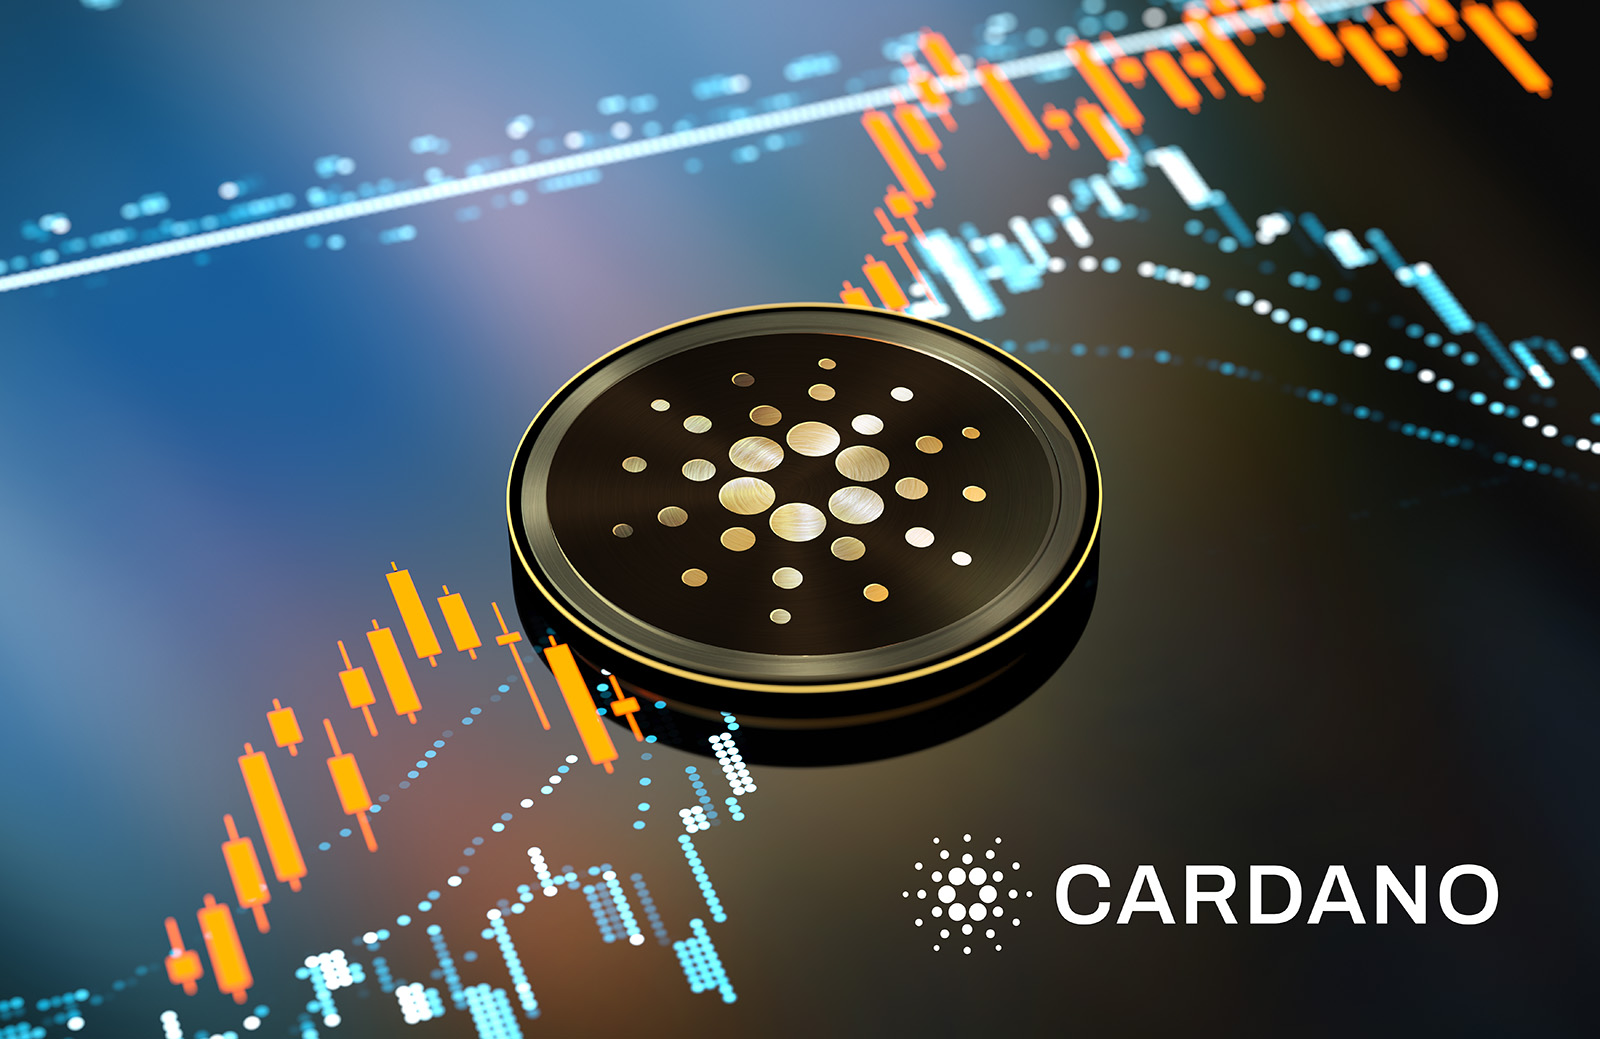 Cardano: Developer Activity, Active Addresses have contrasting data; Why?